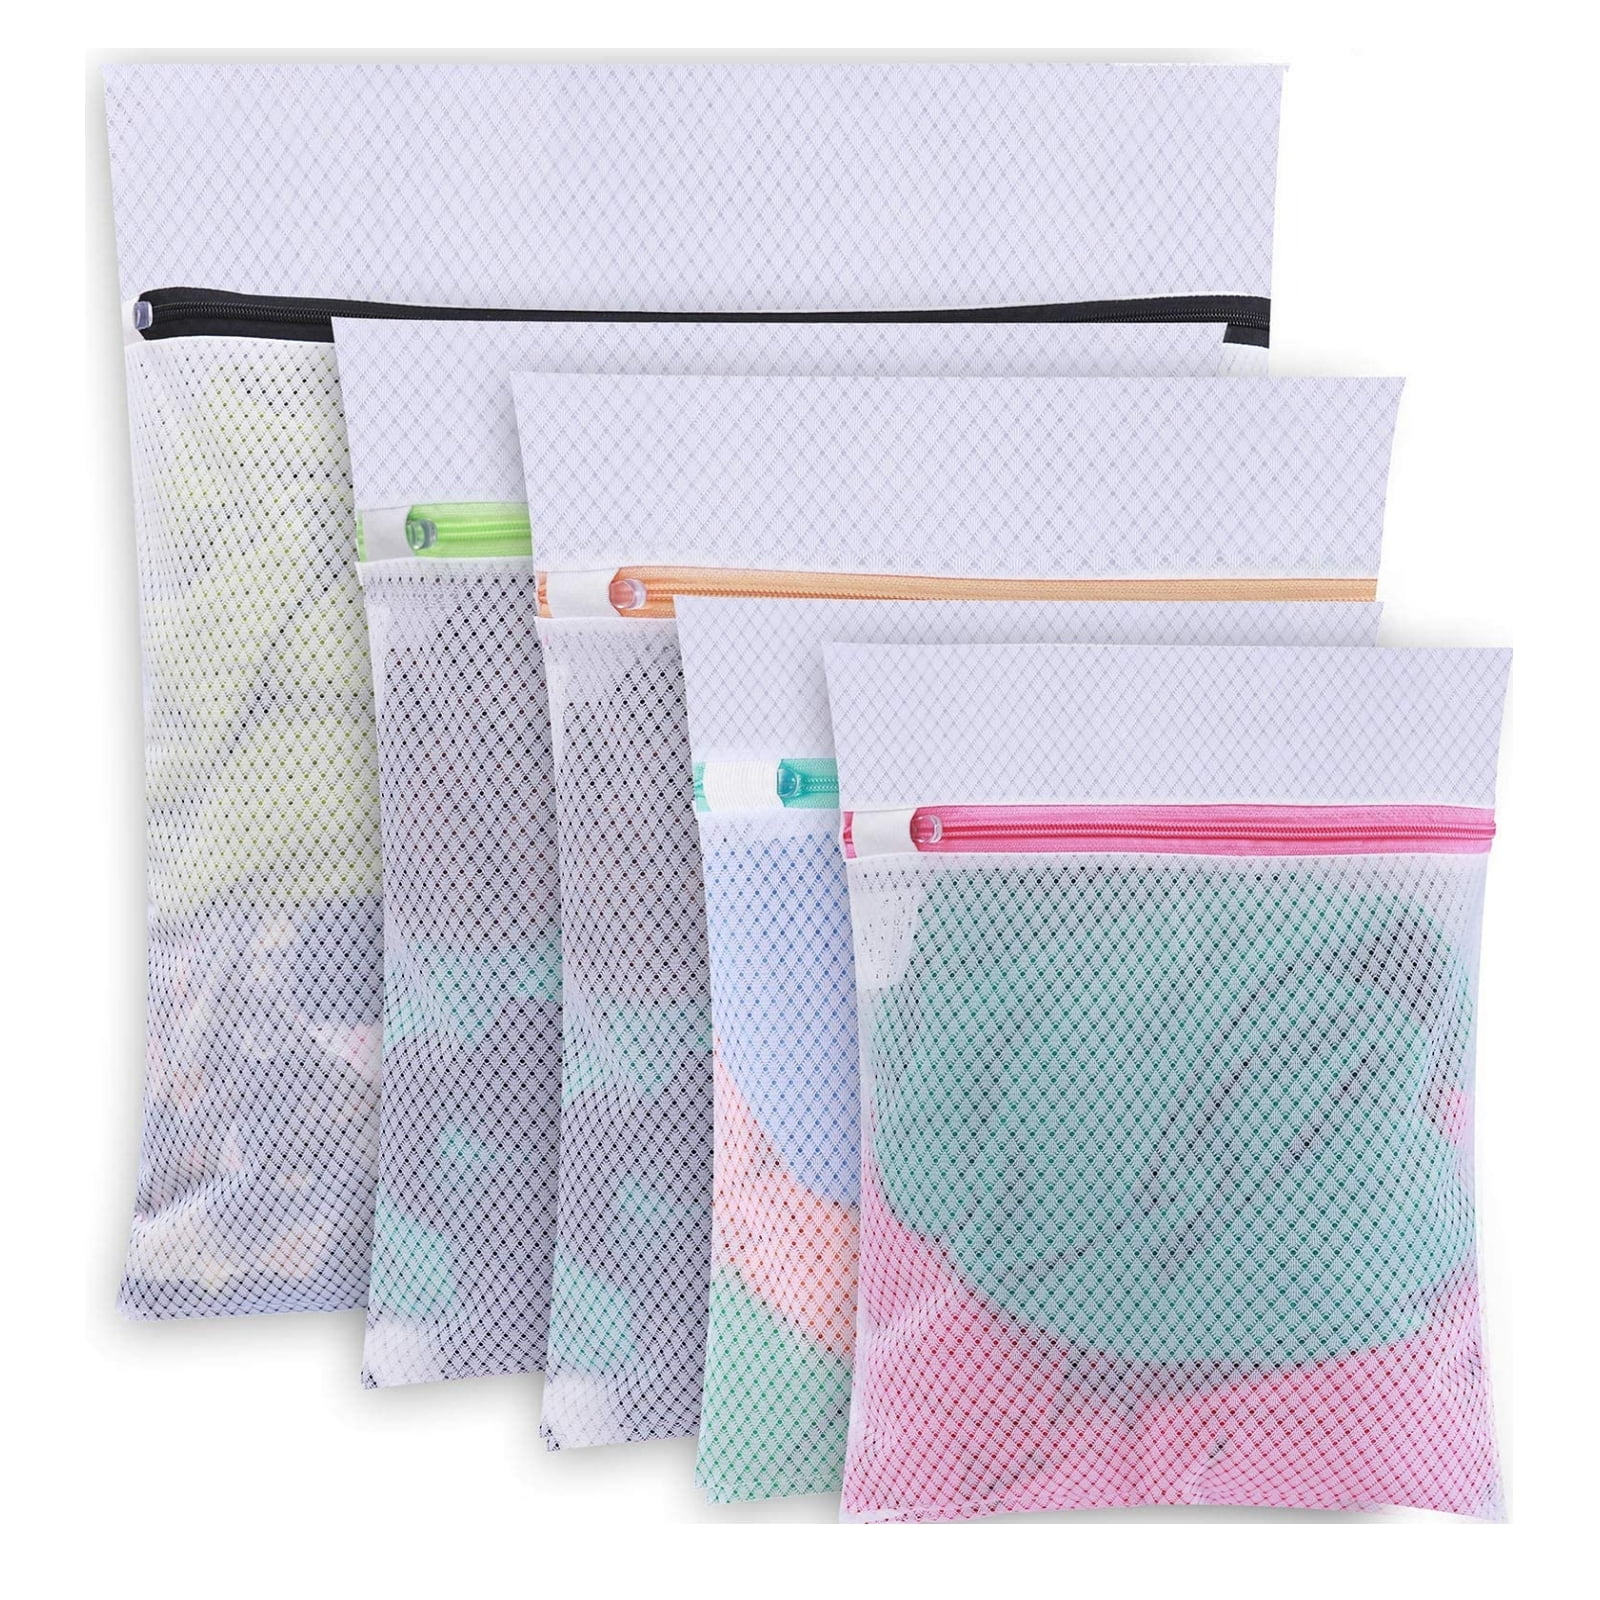 Tripumer 5 Mesh Laundry Bags Deformation-Proof Laundry Bags Reusable ...